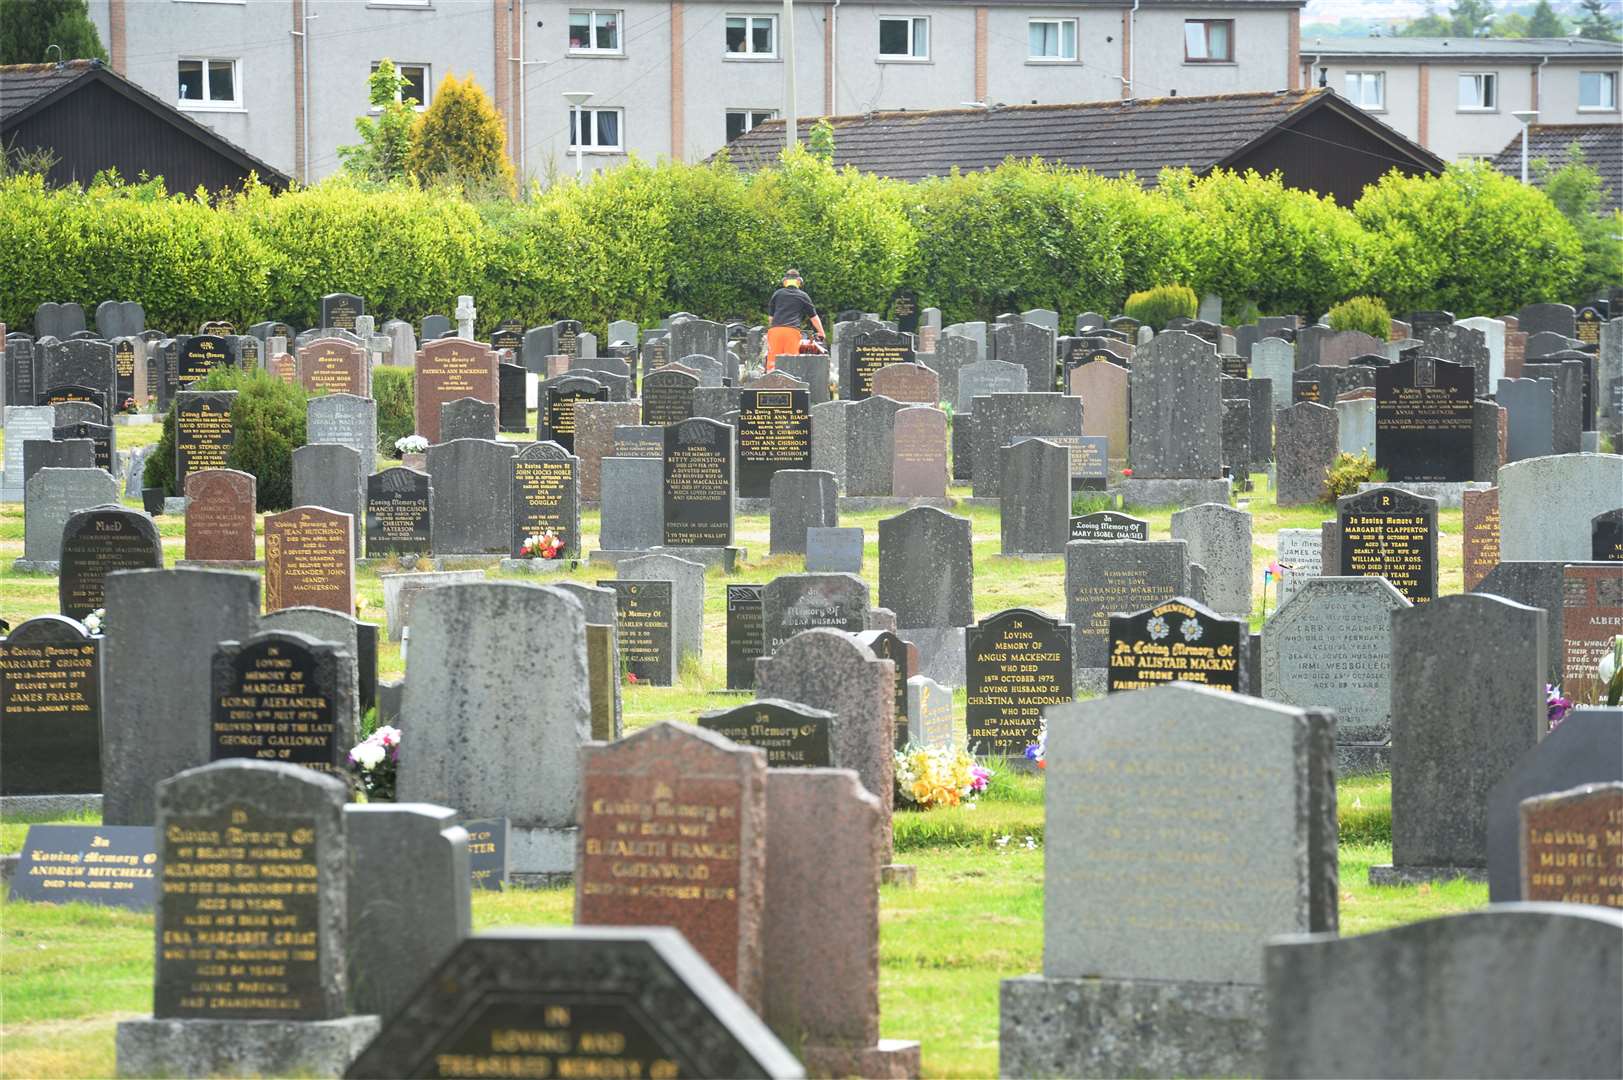 Residents have reported concerns about someone possibly sleeping in Tomnahurich Cemetery.